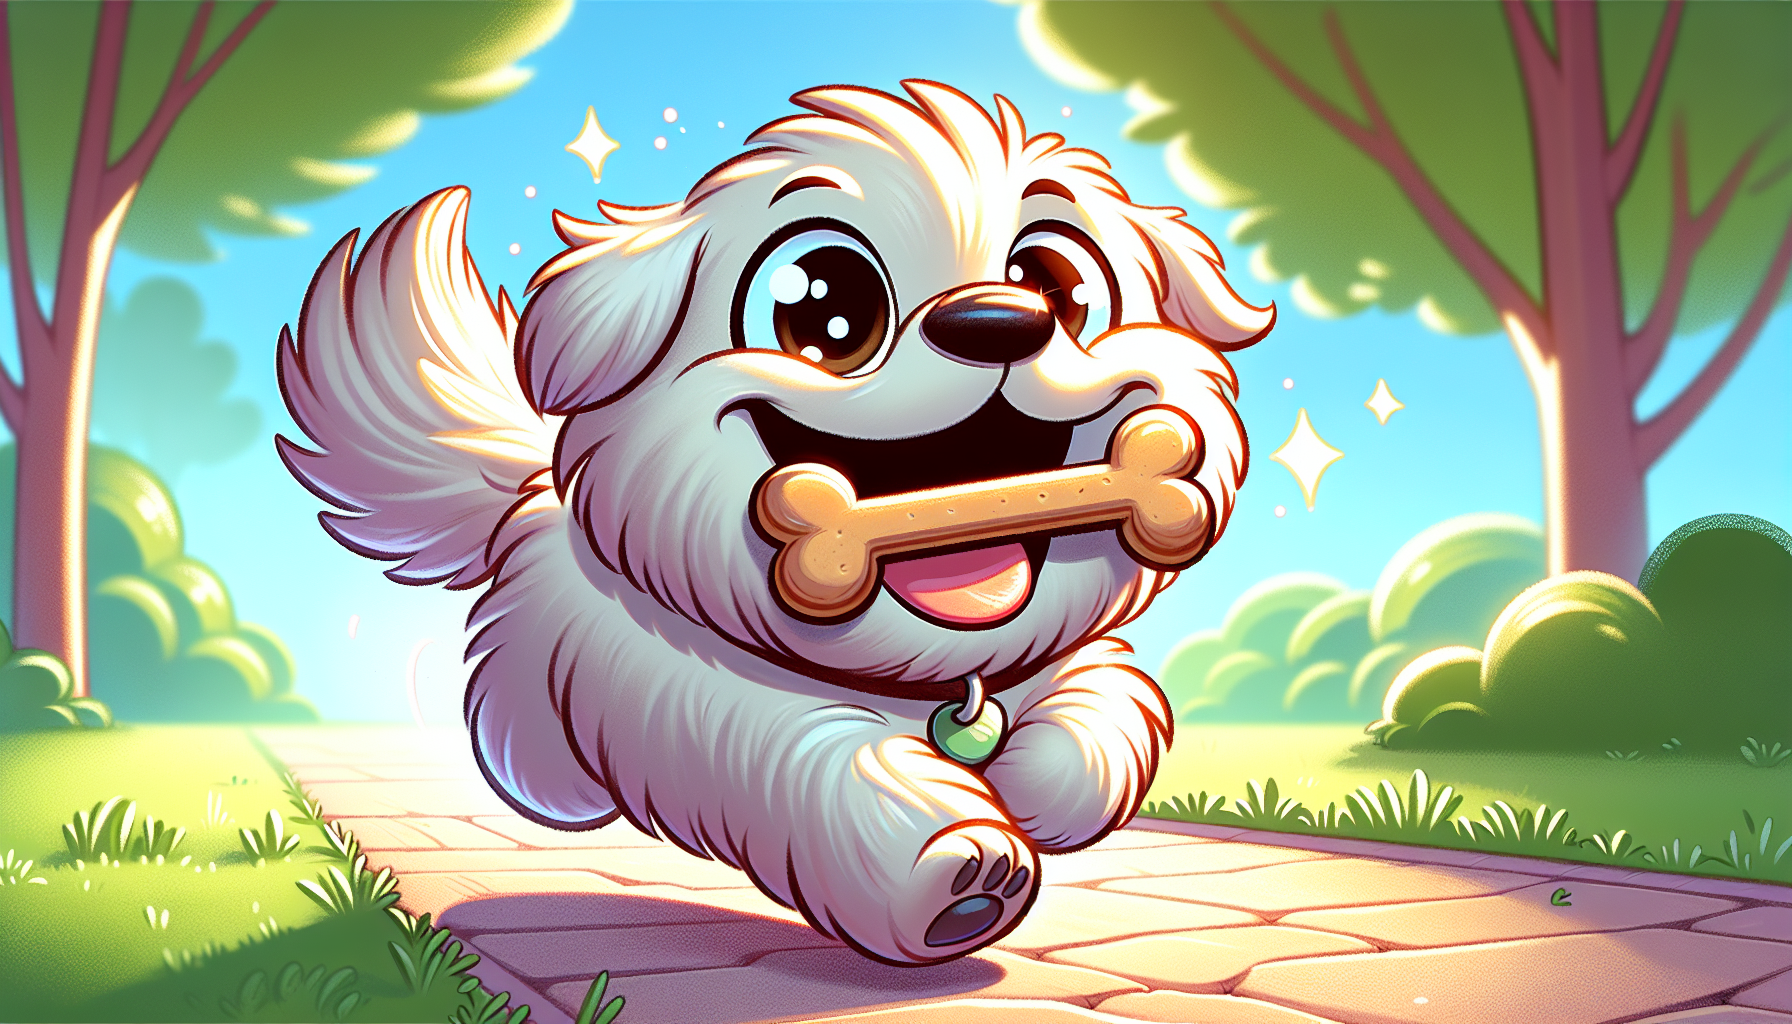 Cartoon of a dog happily walking with a treat in its mouth